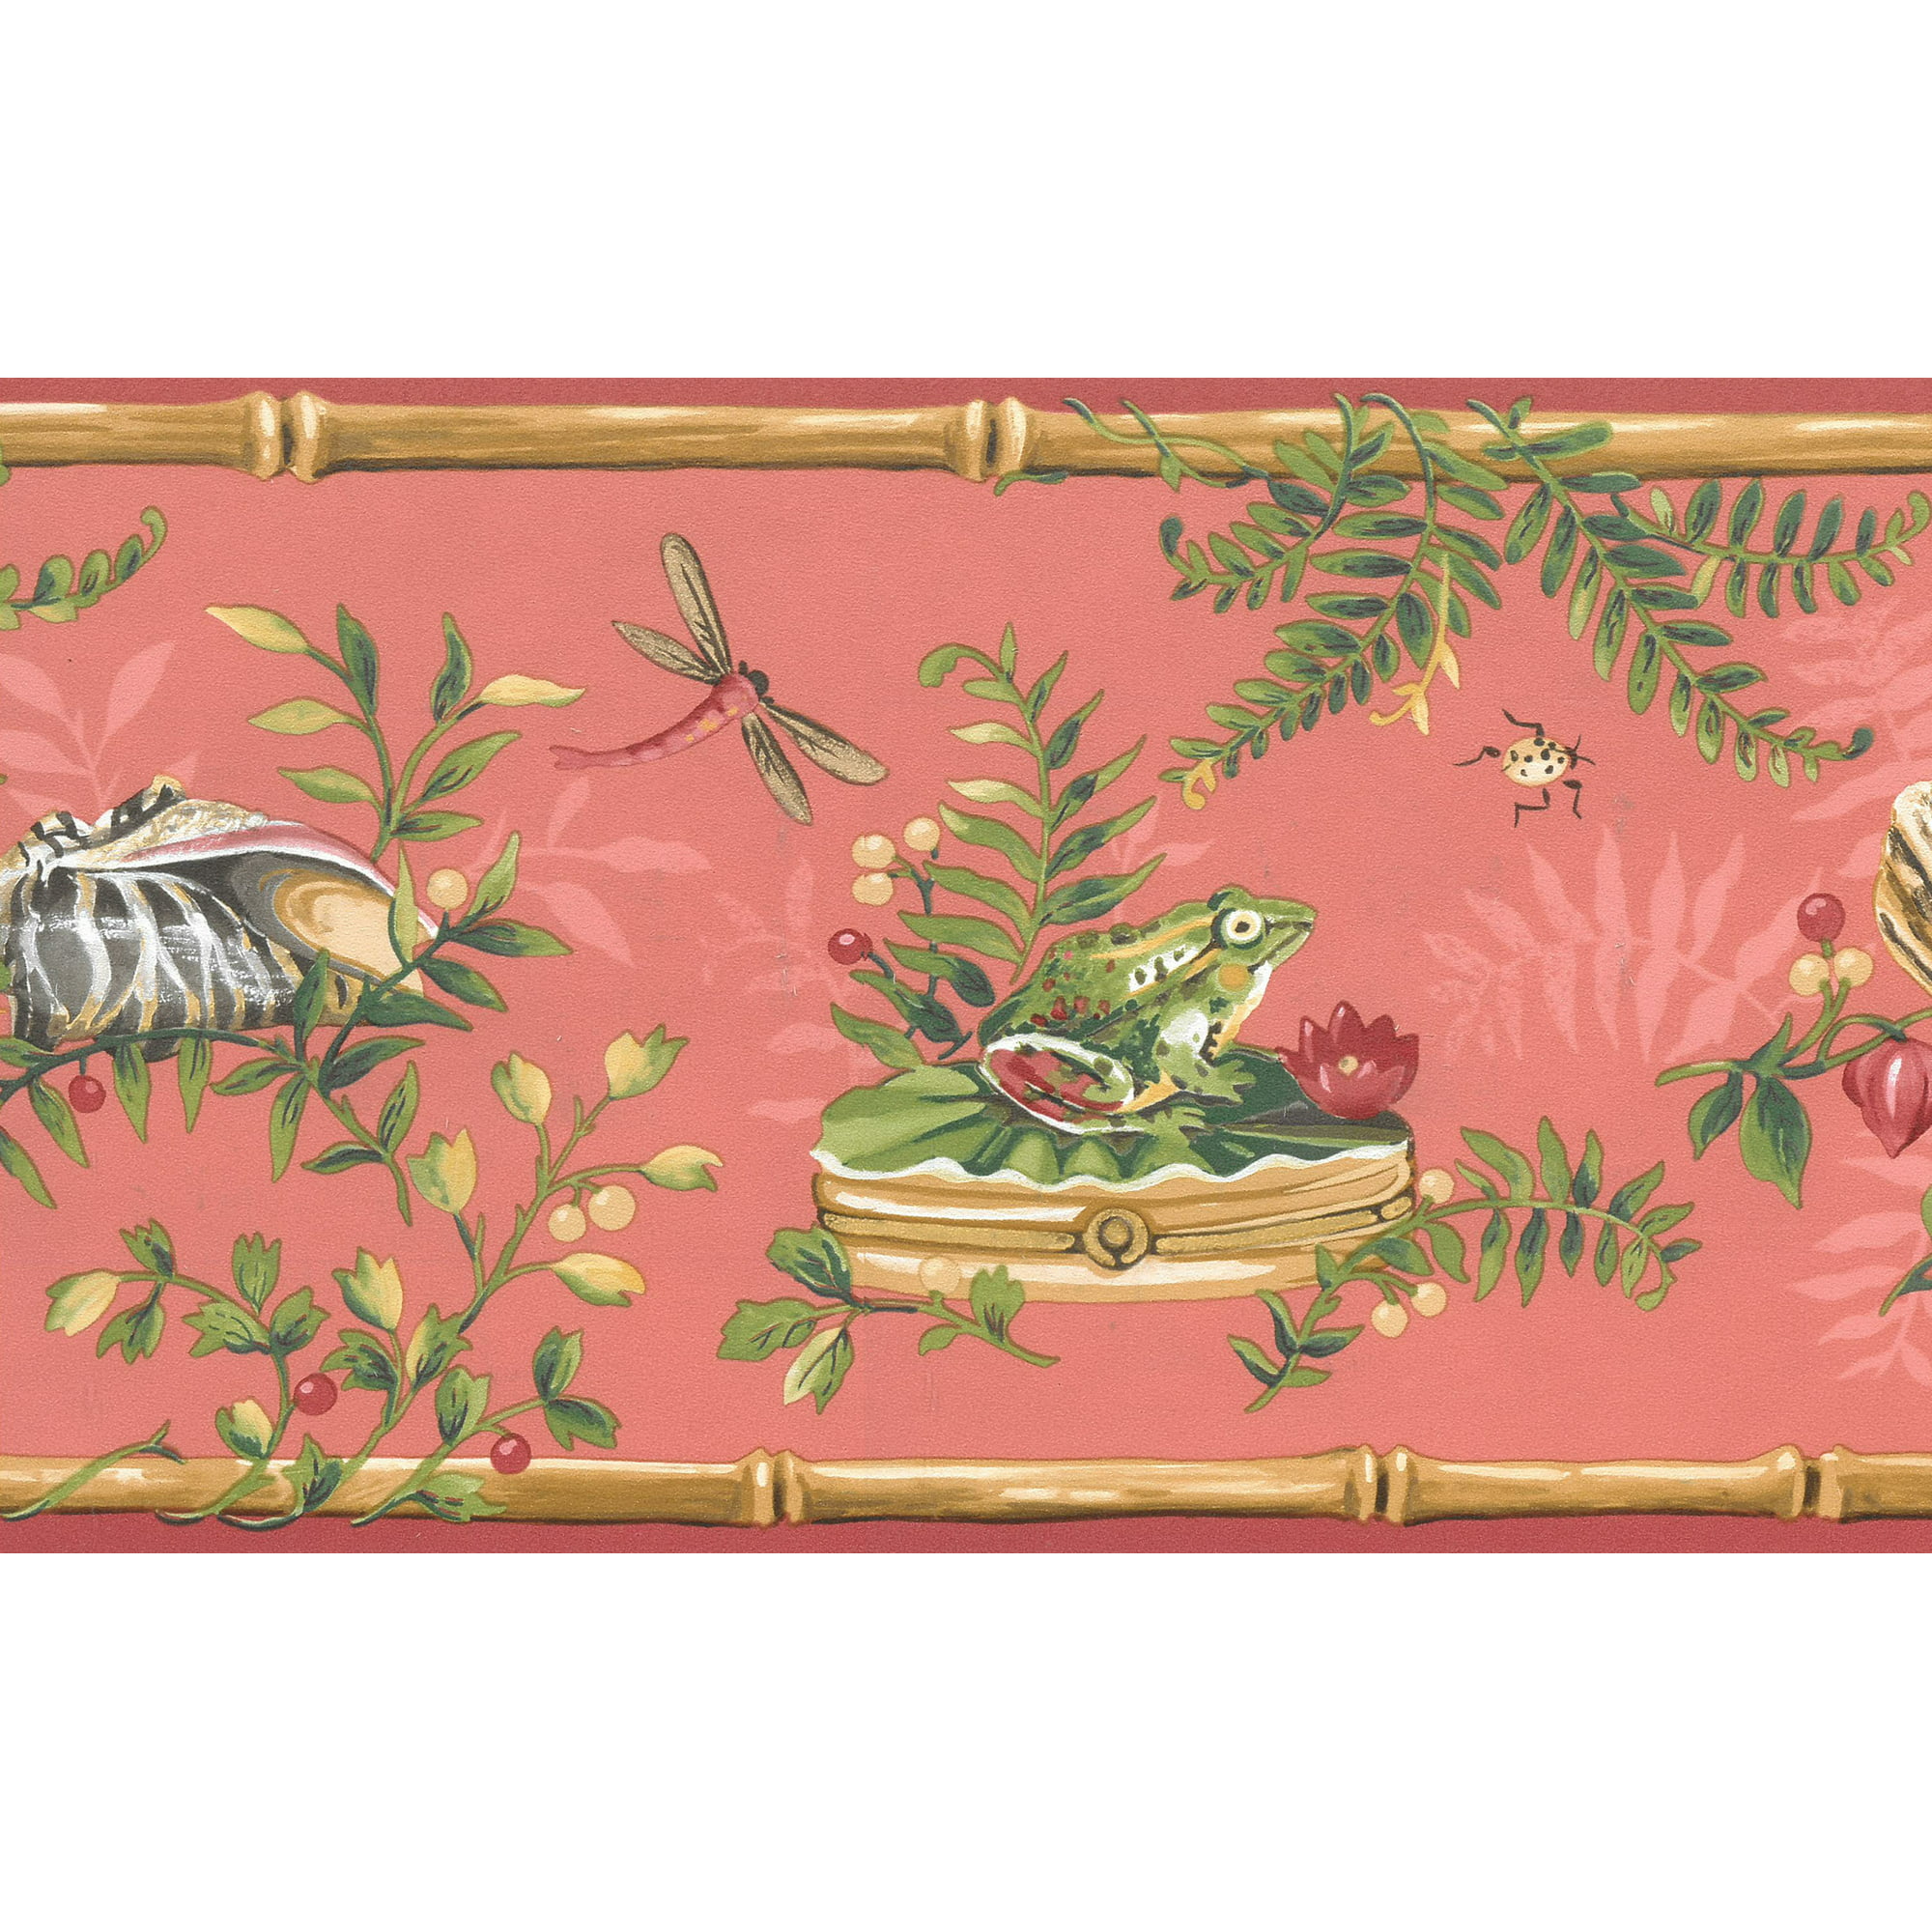 Prepasted Wallpaper Border - Nature Rose Rouge Pink, Green, Brown Frog,  Bird, Shell, Bamboo Wall Border Retro Design, 15 ft x  in ( x  ) | Walmart Canada